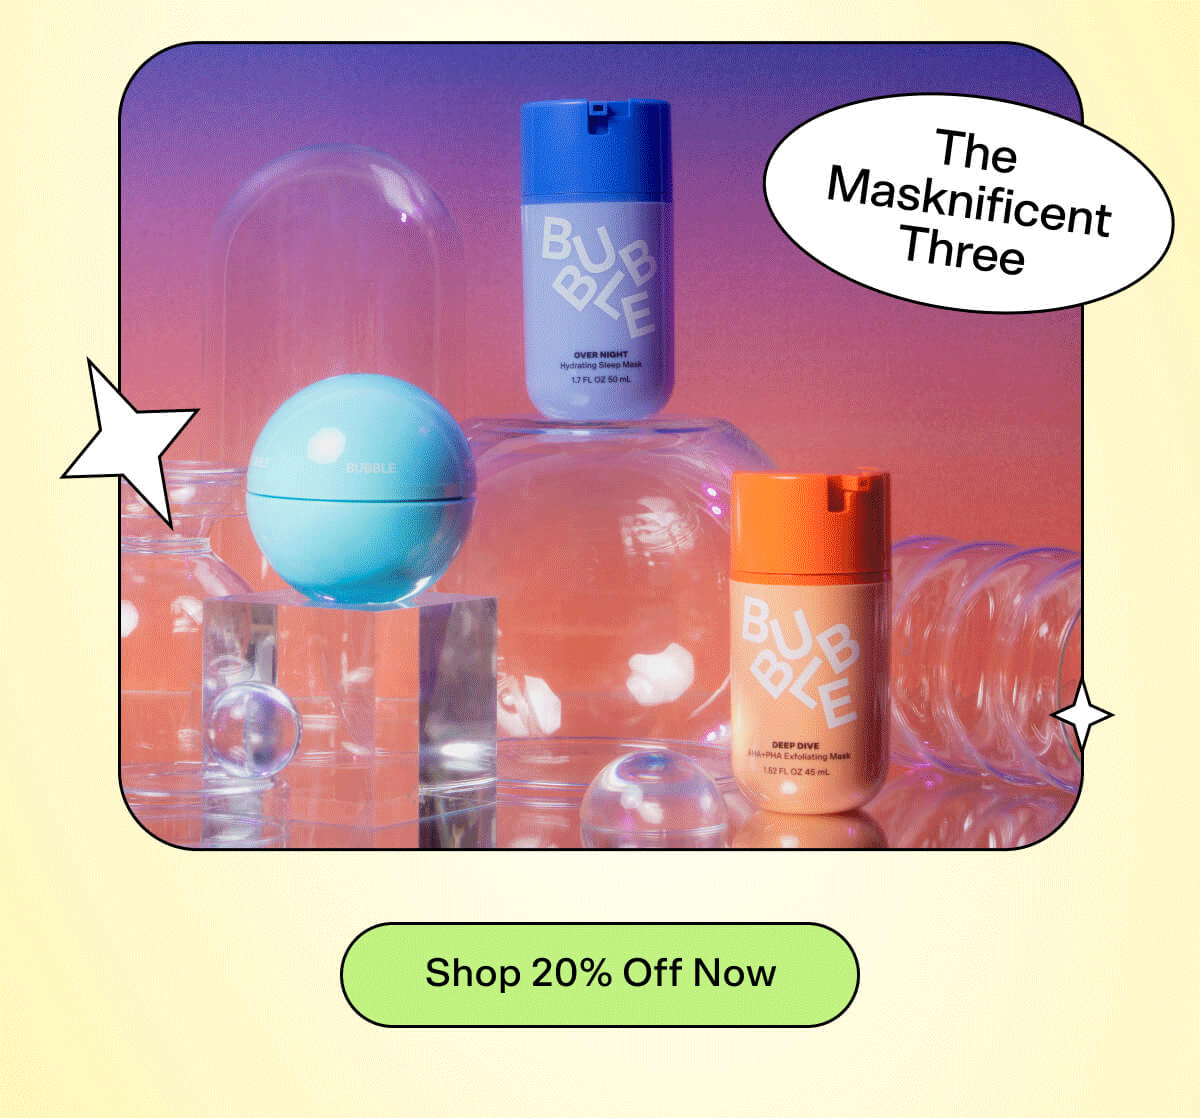 Masknificent Three Rise & Shine Set Day and Night Routine Re-Set Shop 20% Off Now